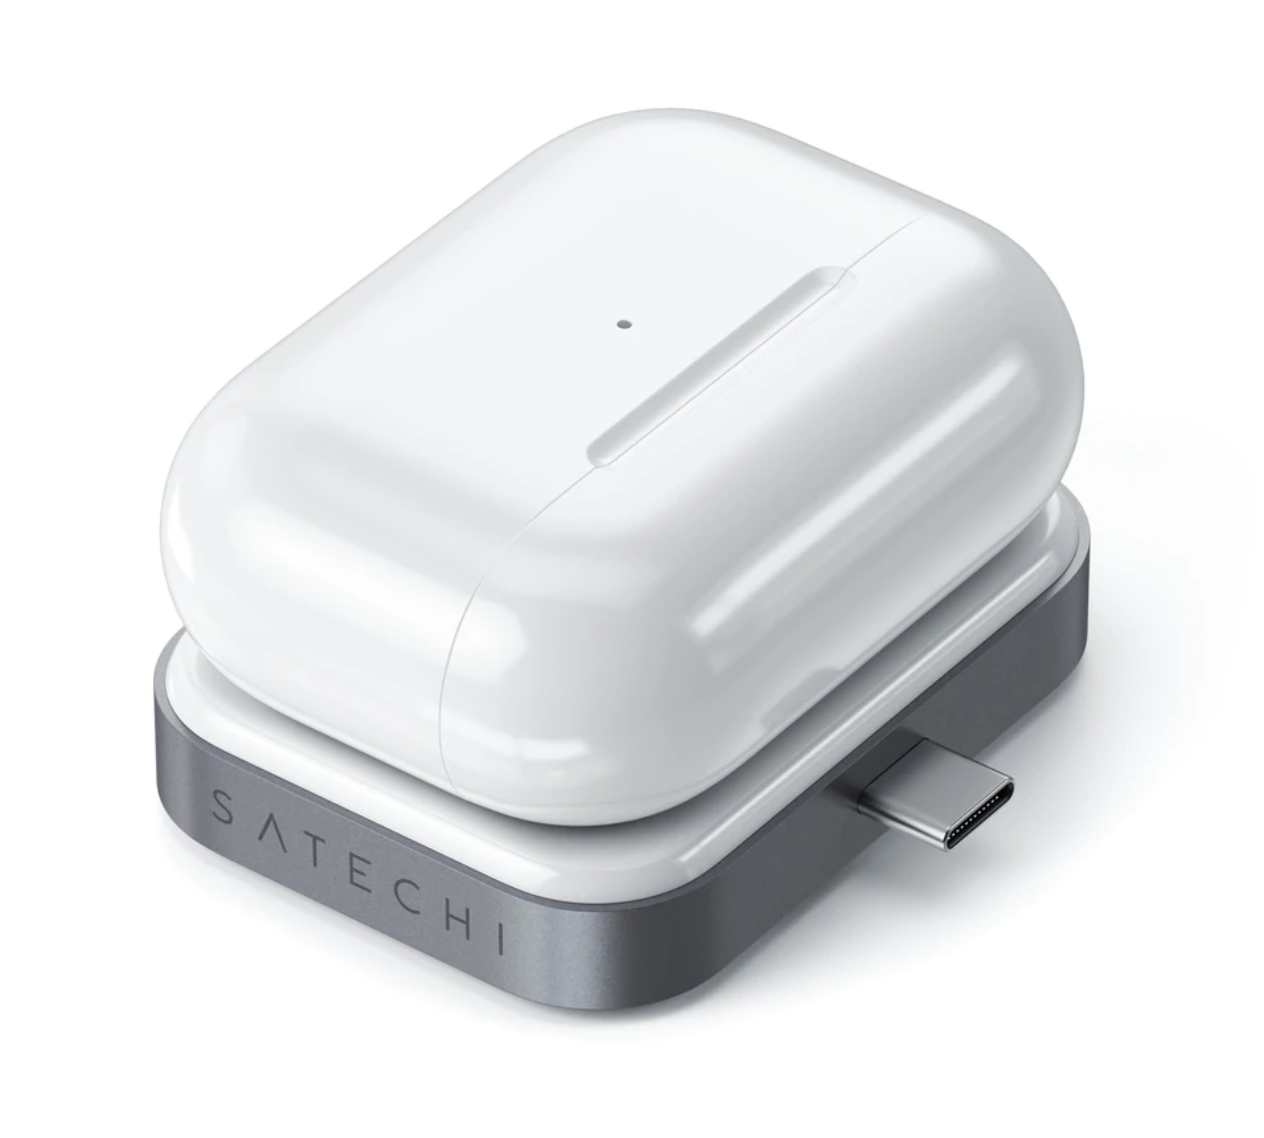 Satechi USB-C Wireless Charging Dock for Apple AirPods